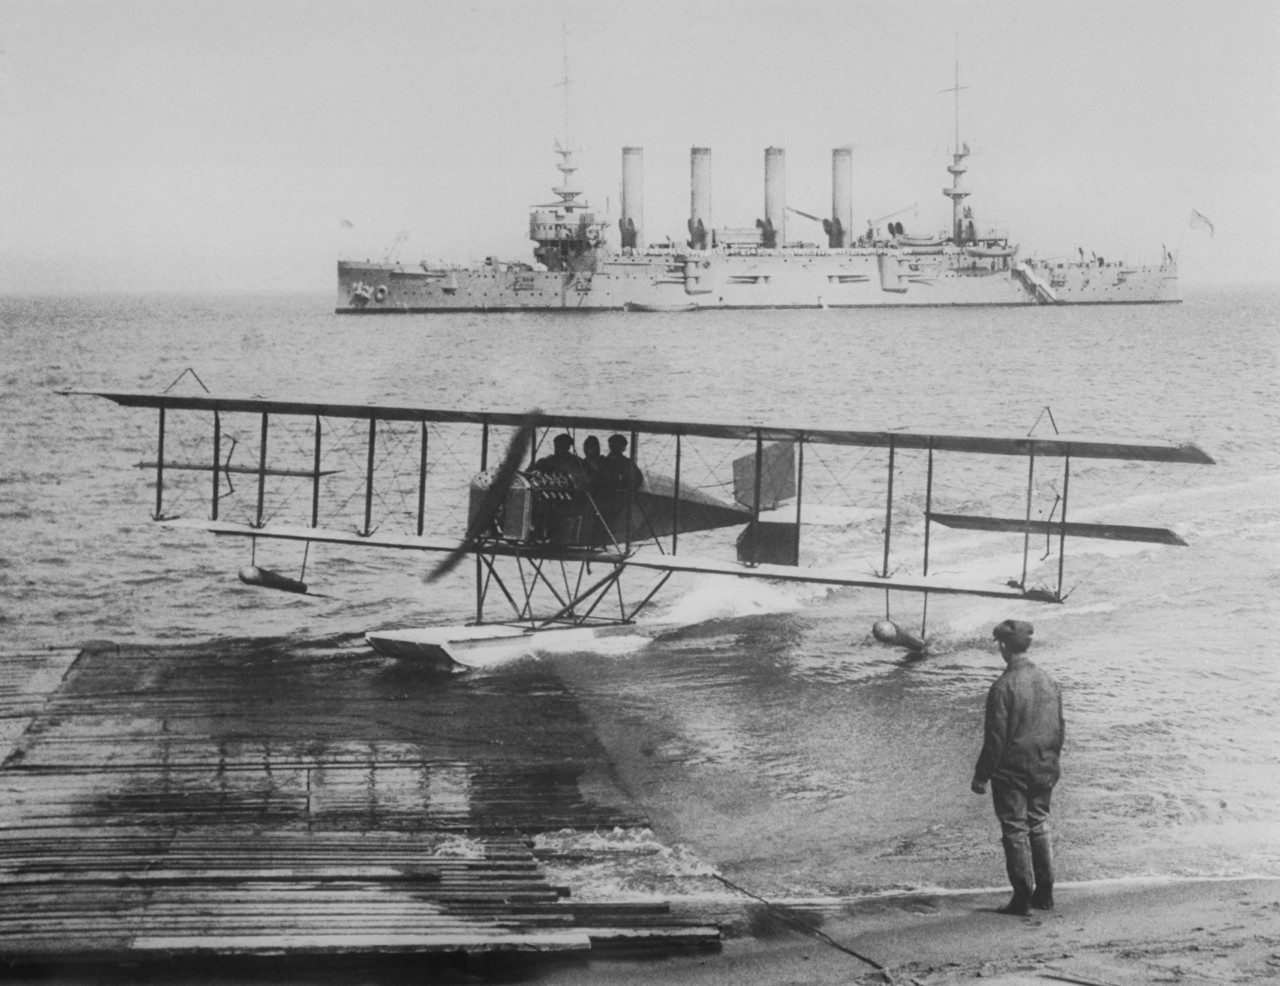 The Model G at the 1915 Panama-Pacific International Exposition in San Francisco